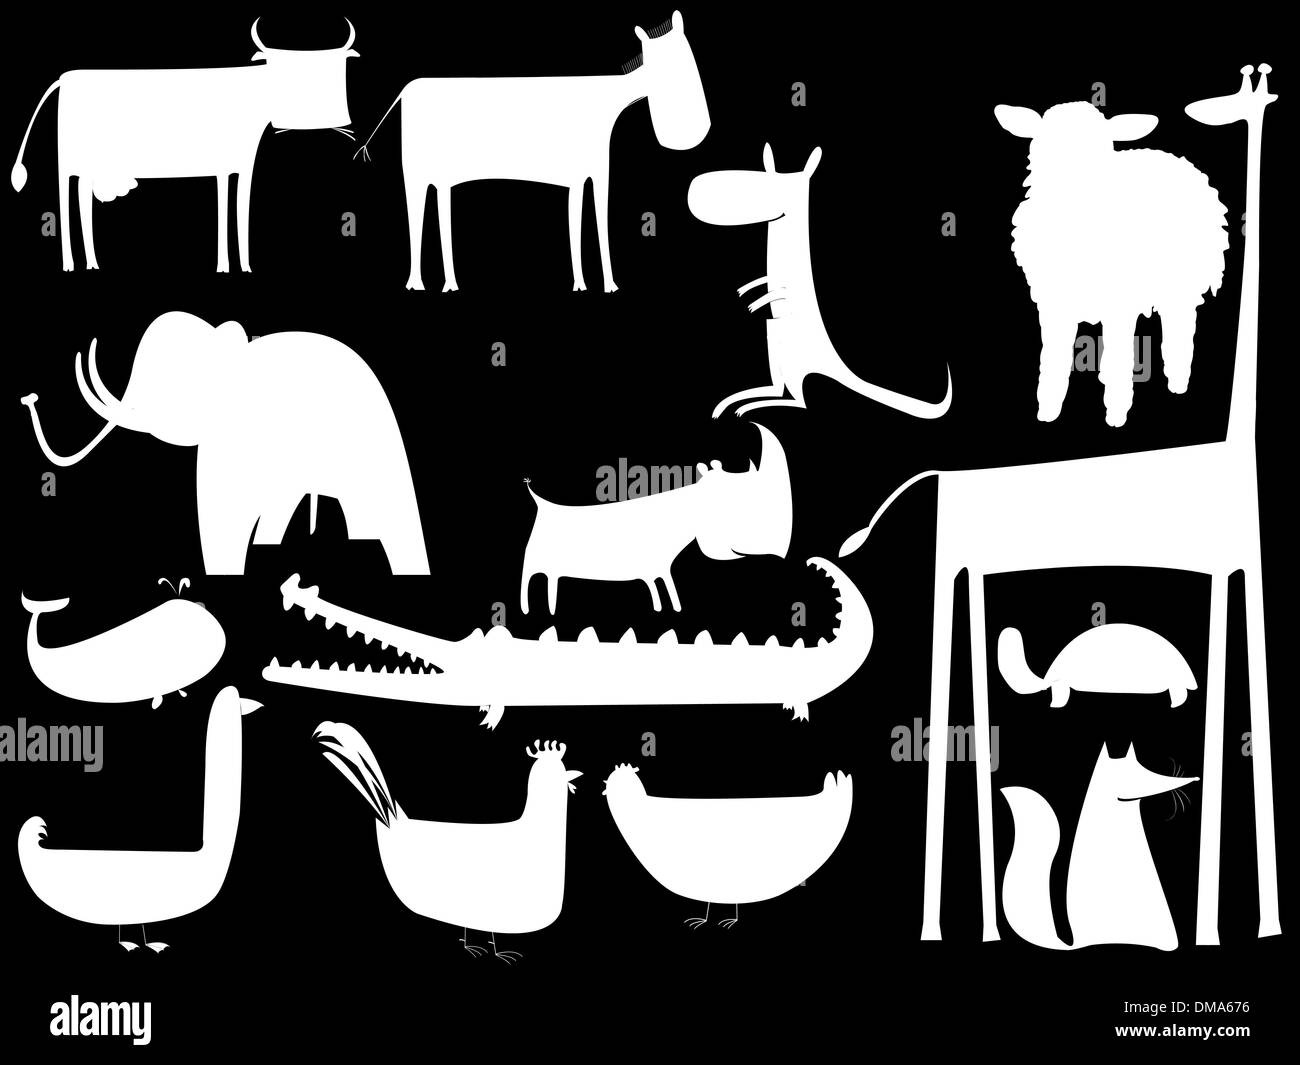 animal white silhouettes isolated on black background Stock Vector